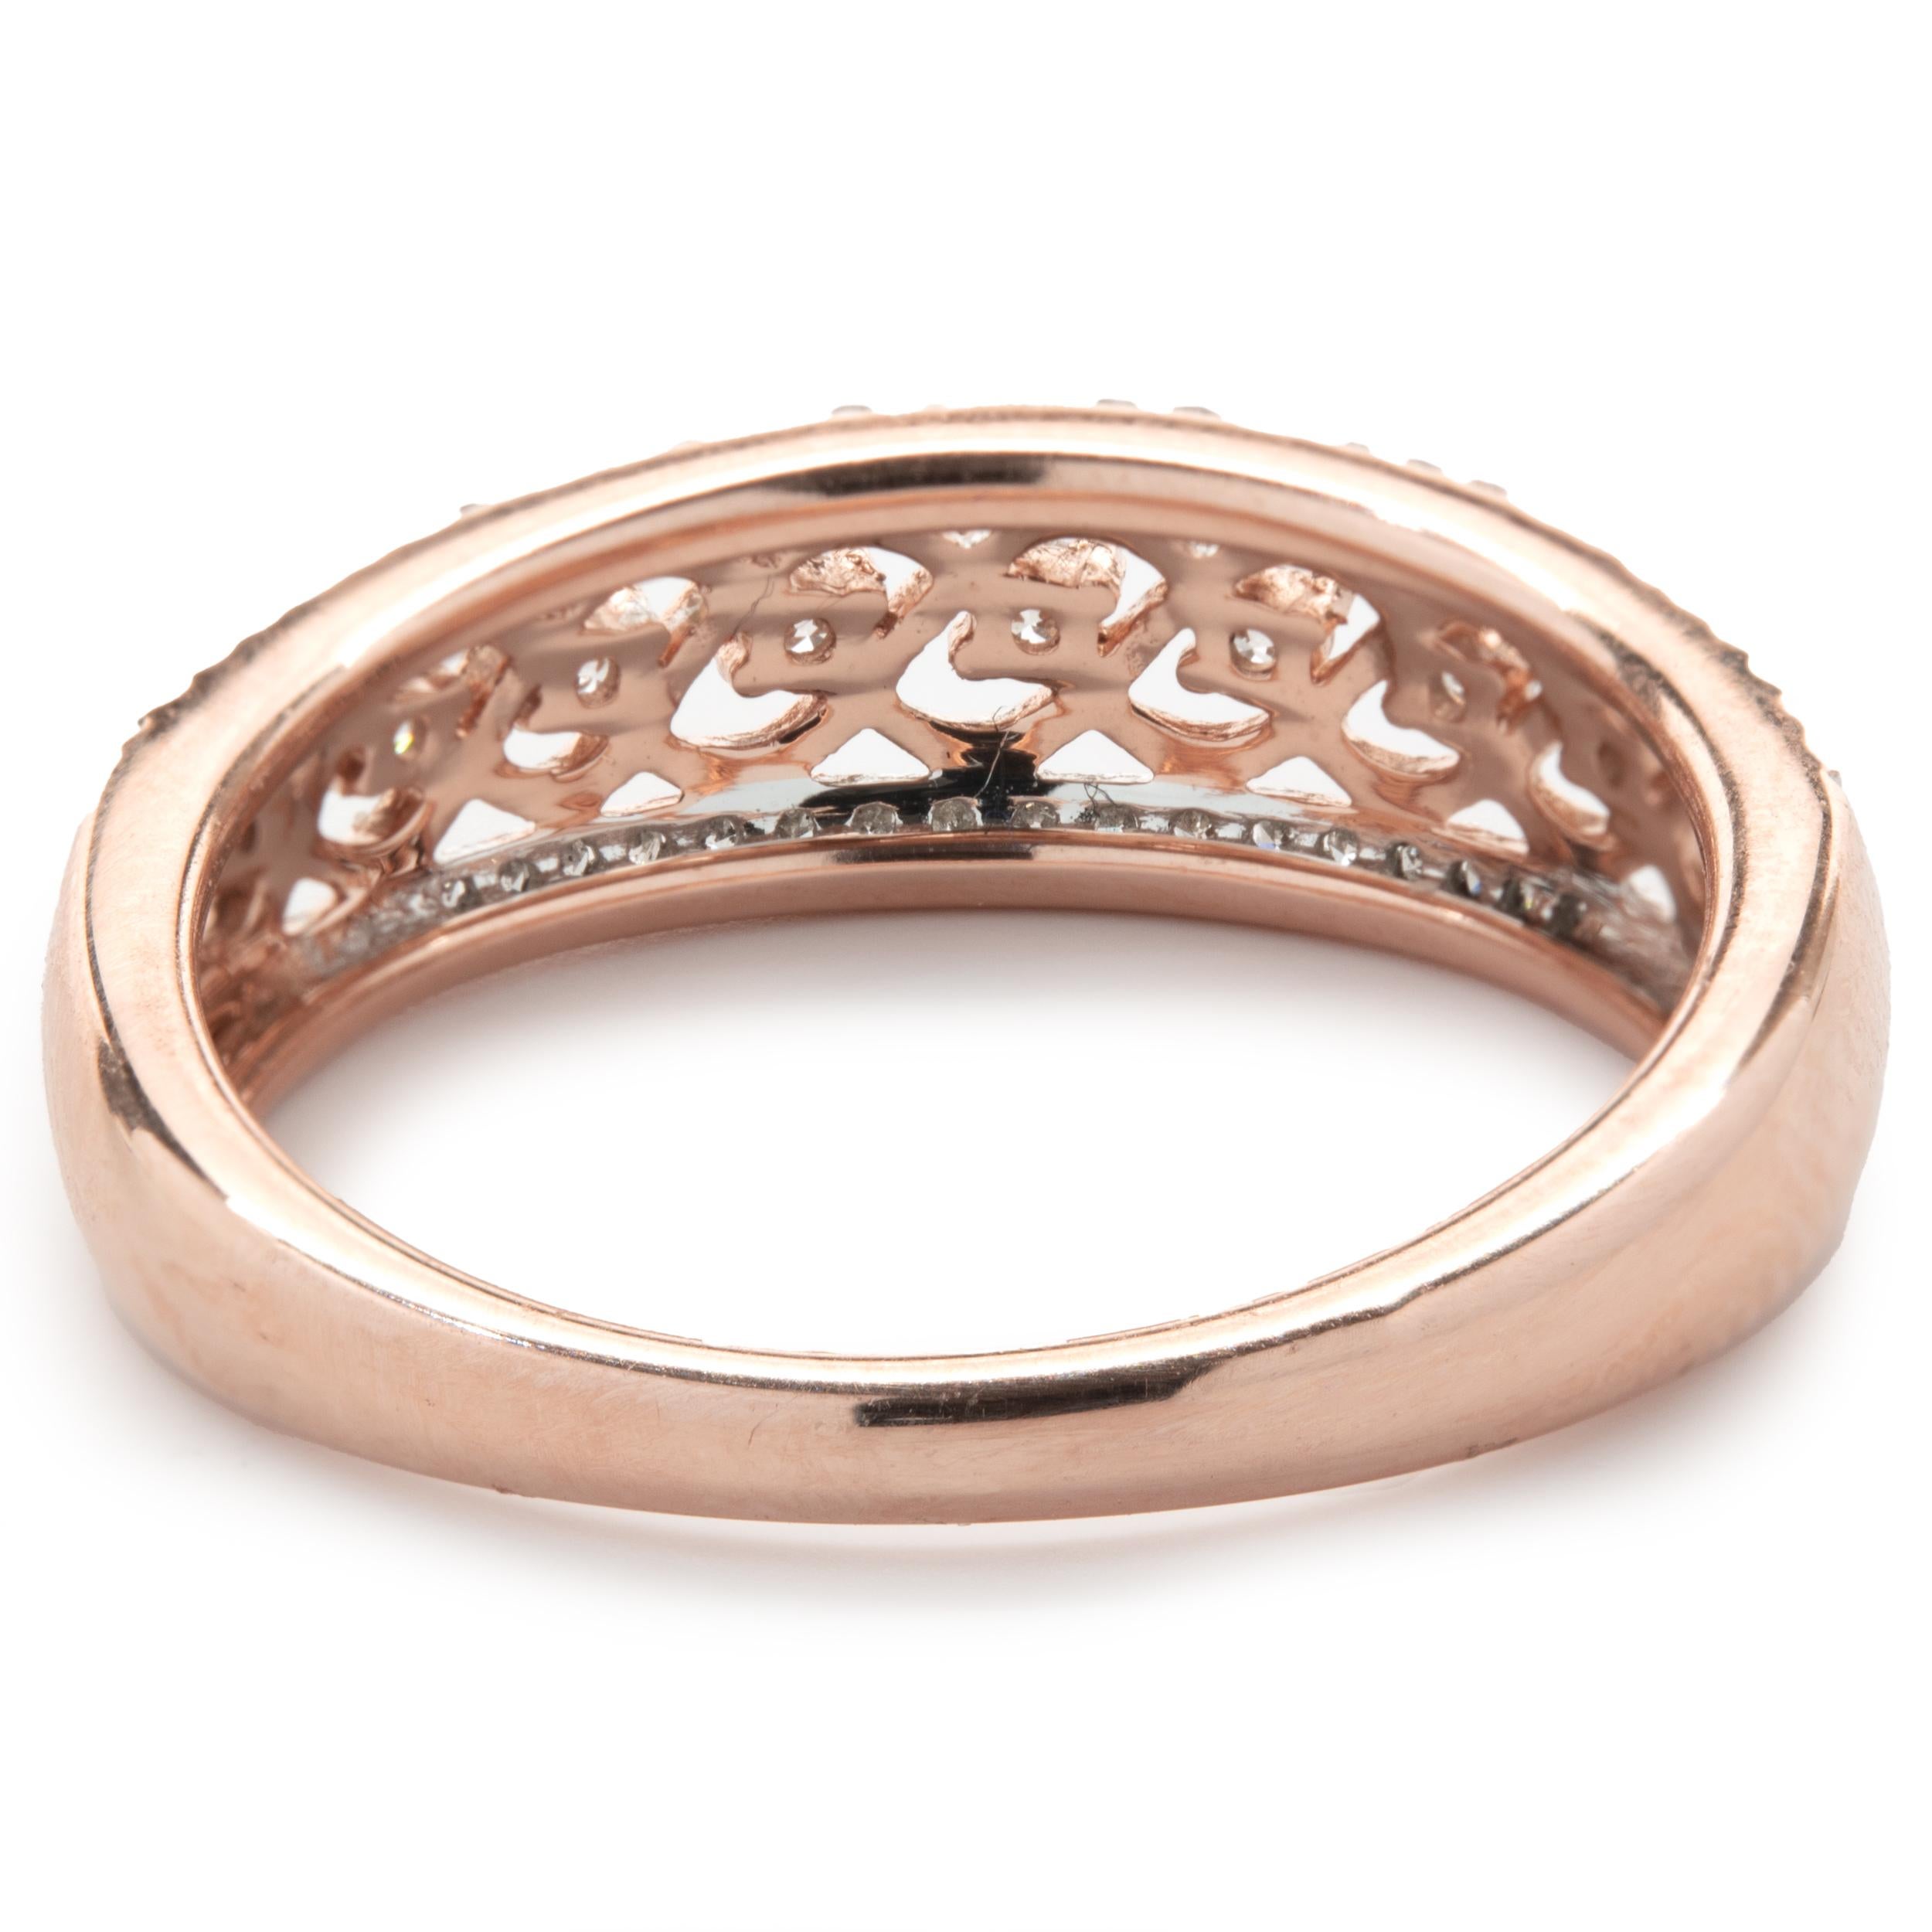 10 Karat Rose Gold Open Lace Band In Excellent Condition For Sale In Scottsdale, AZ